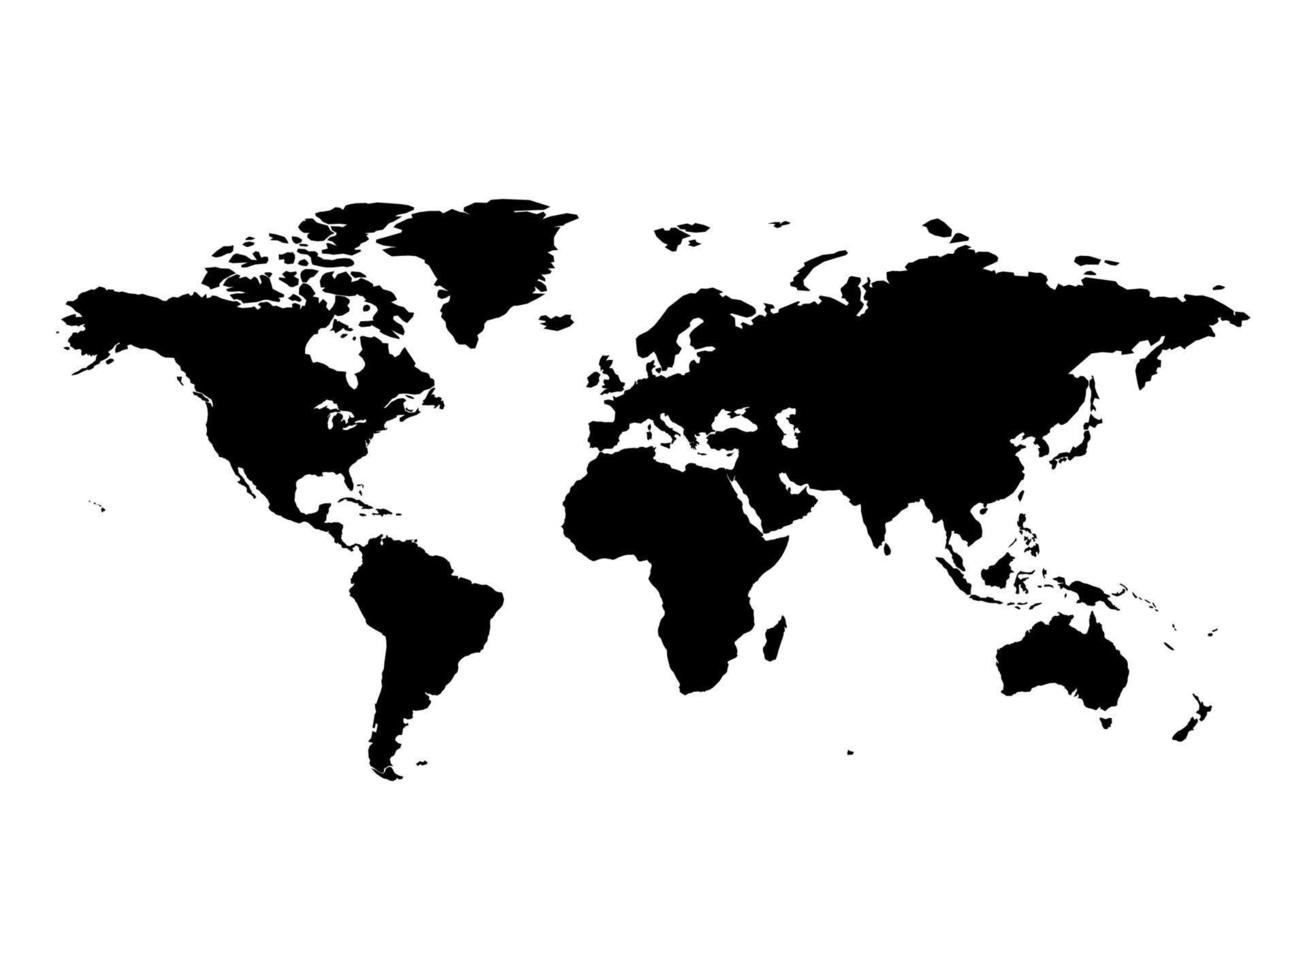 World Map in Black and White vector